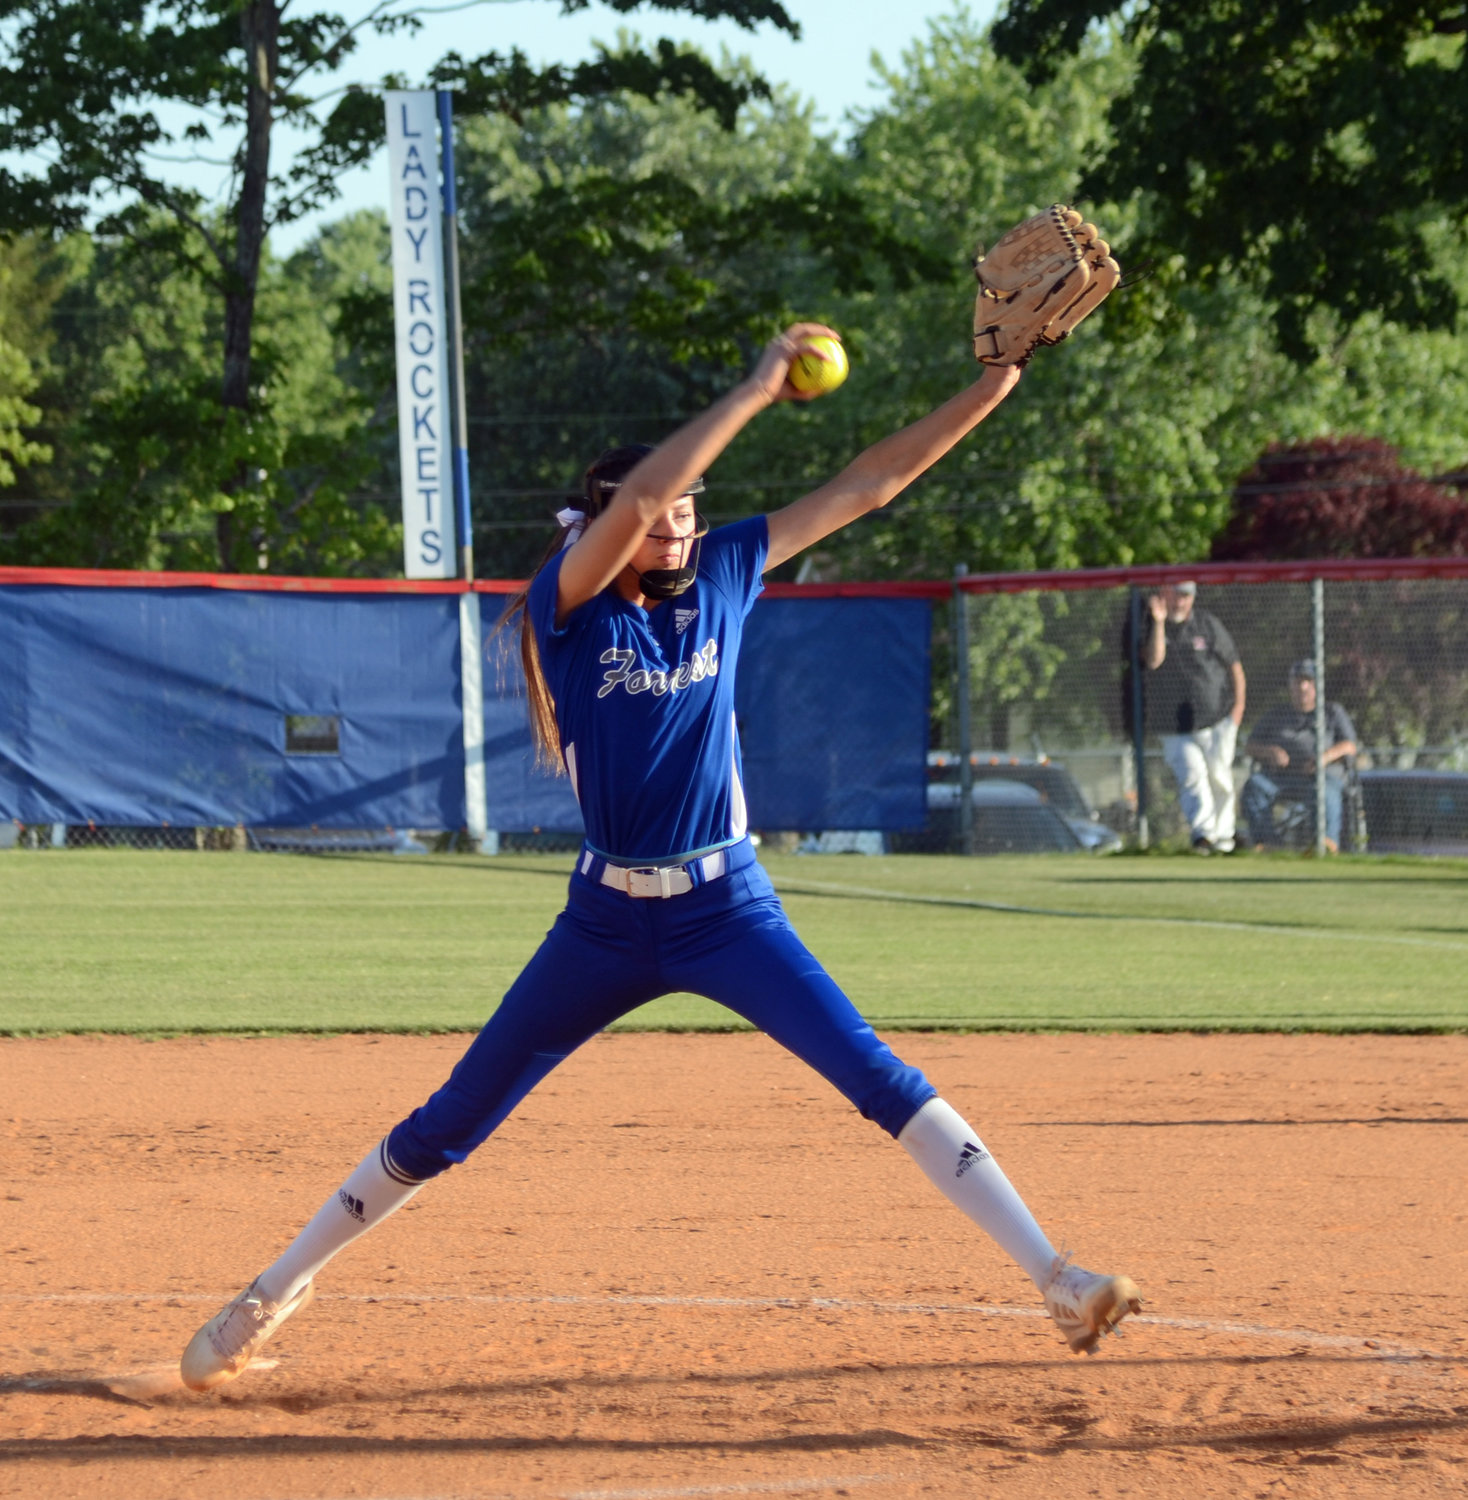 Ella Chilton picked up the win in the circle for Forrest, combining with Emory Hall for an all-freshman no-hitter versus Whites Creek in the opening round of the Region 4-AA Tournament at Chapel Hill Monday night. 